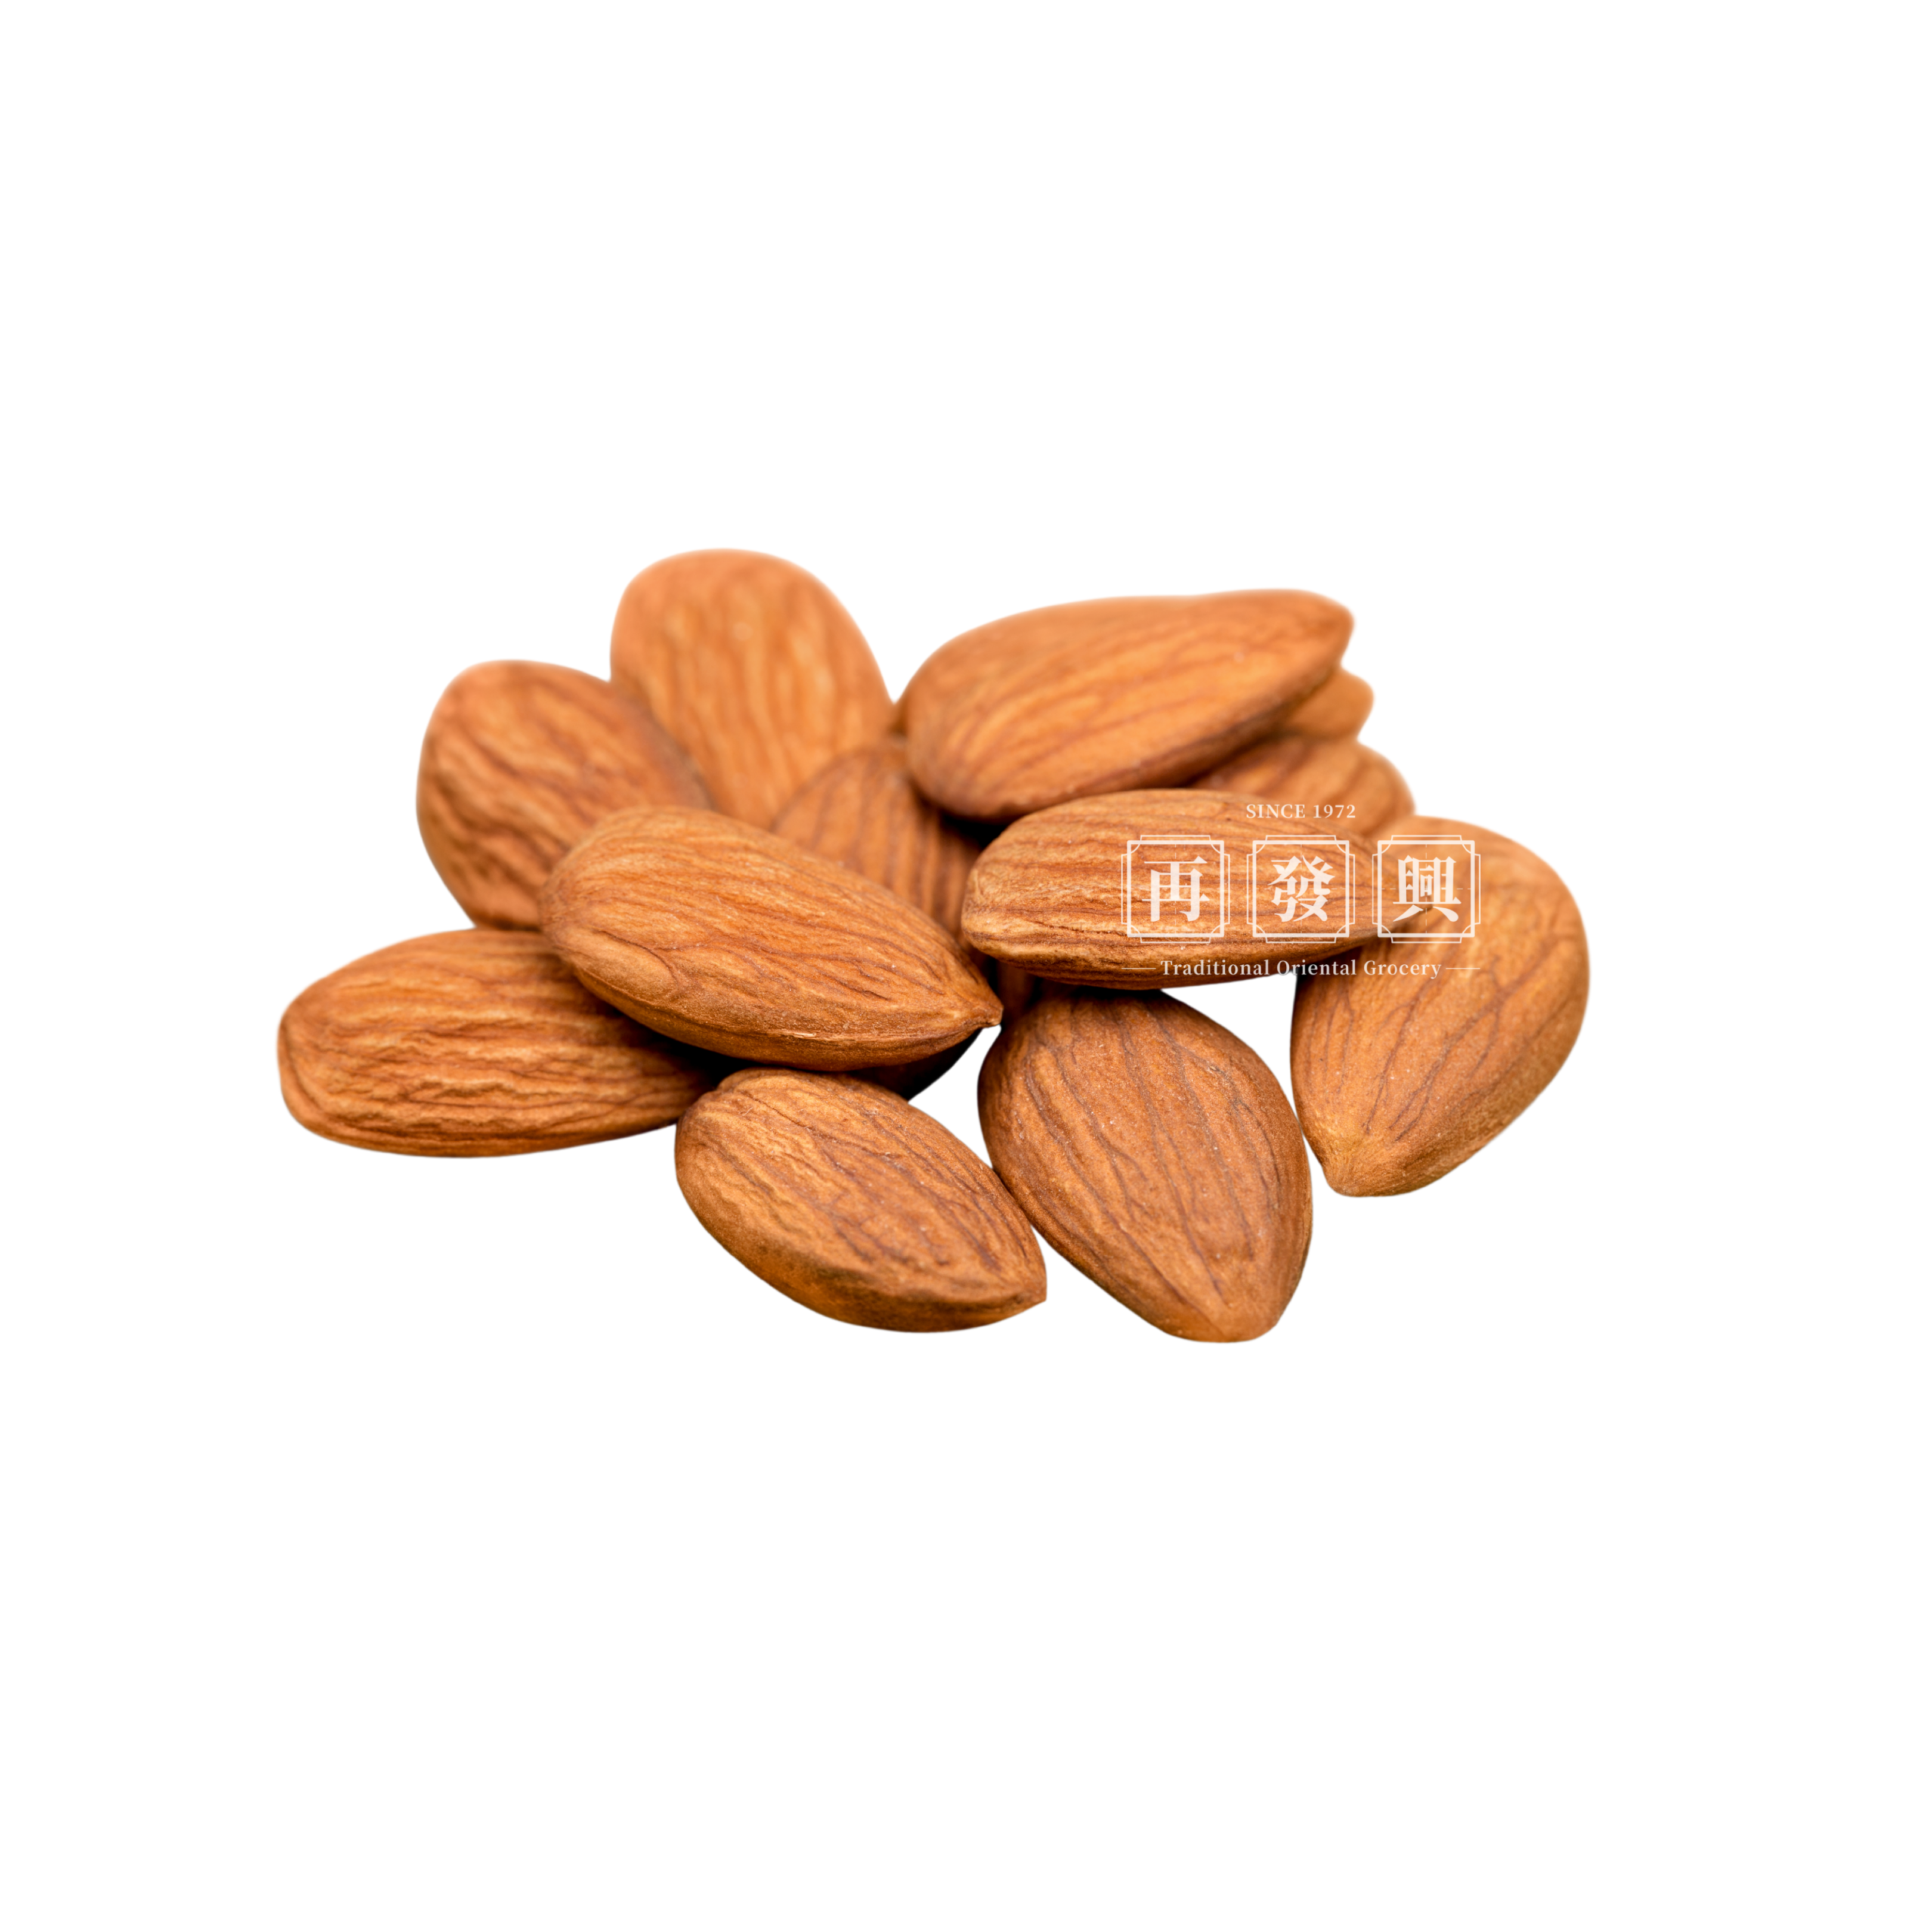 Roasted Salted Almond 400g